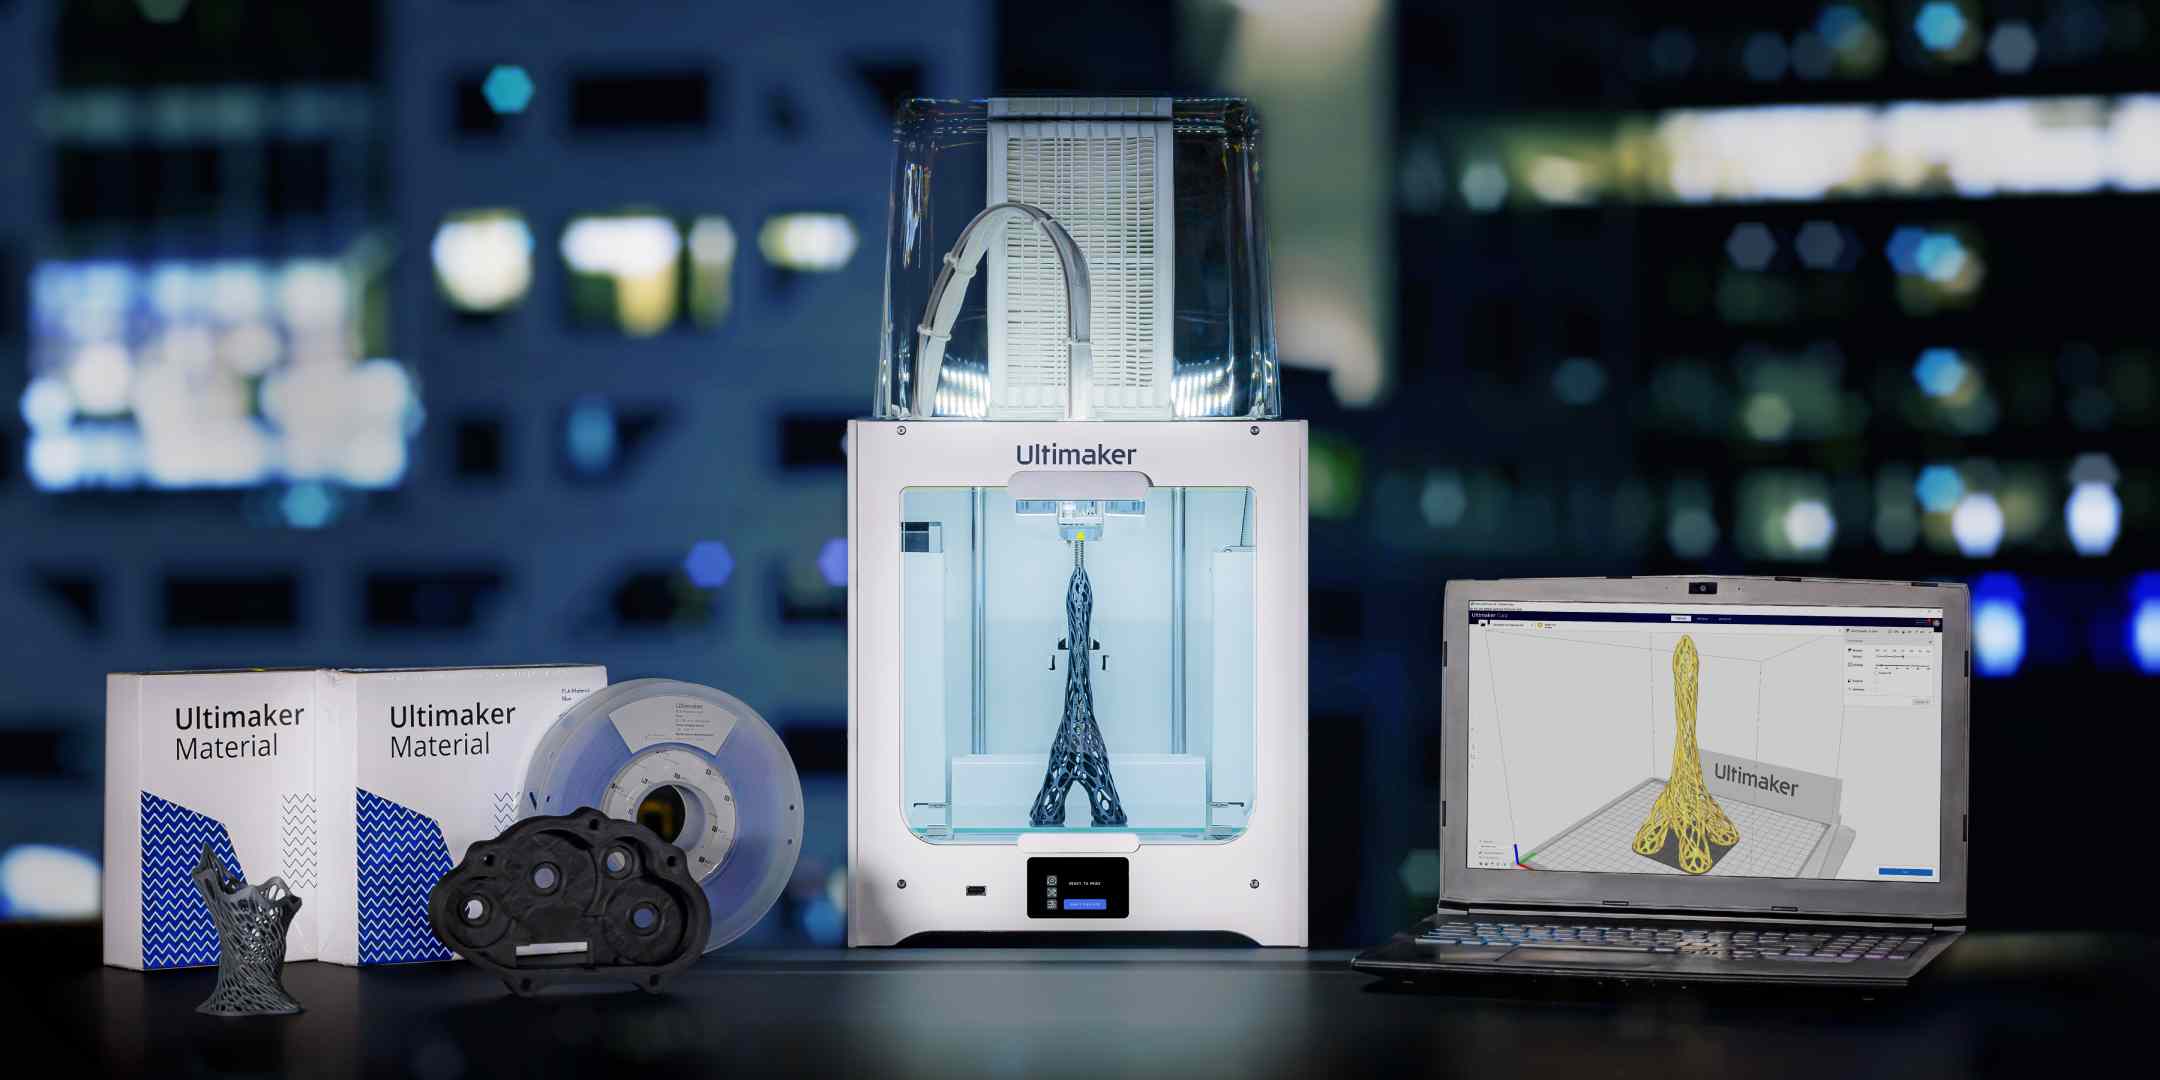 A 3D printer with software and material products